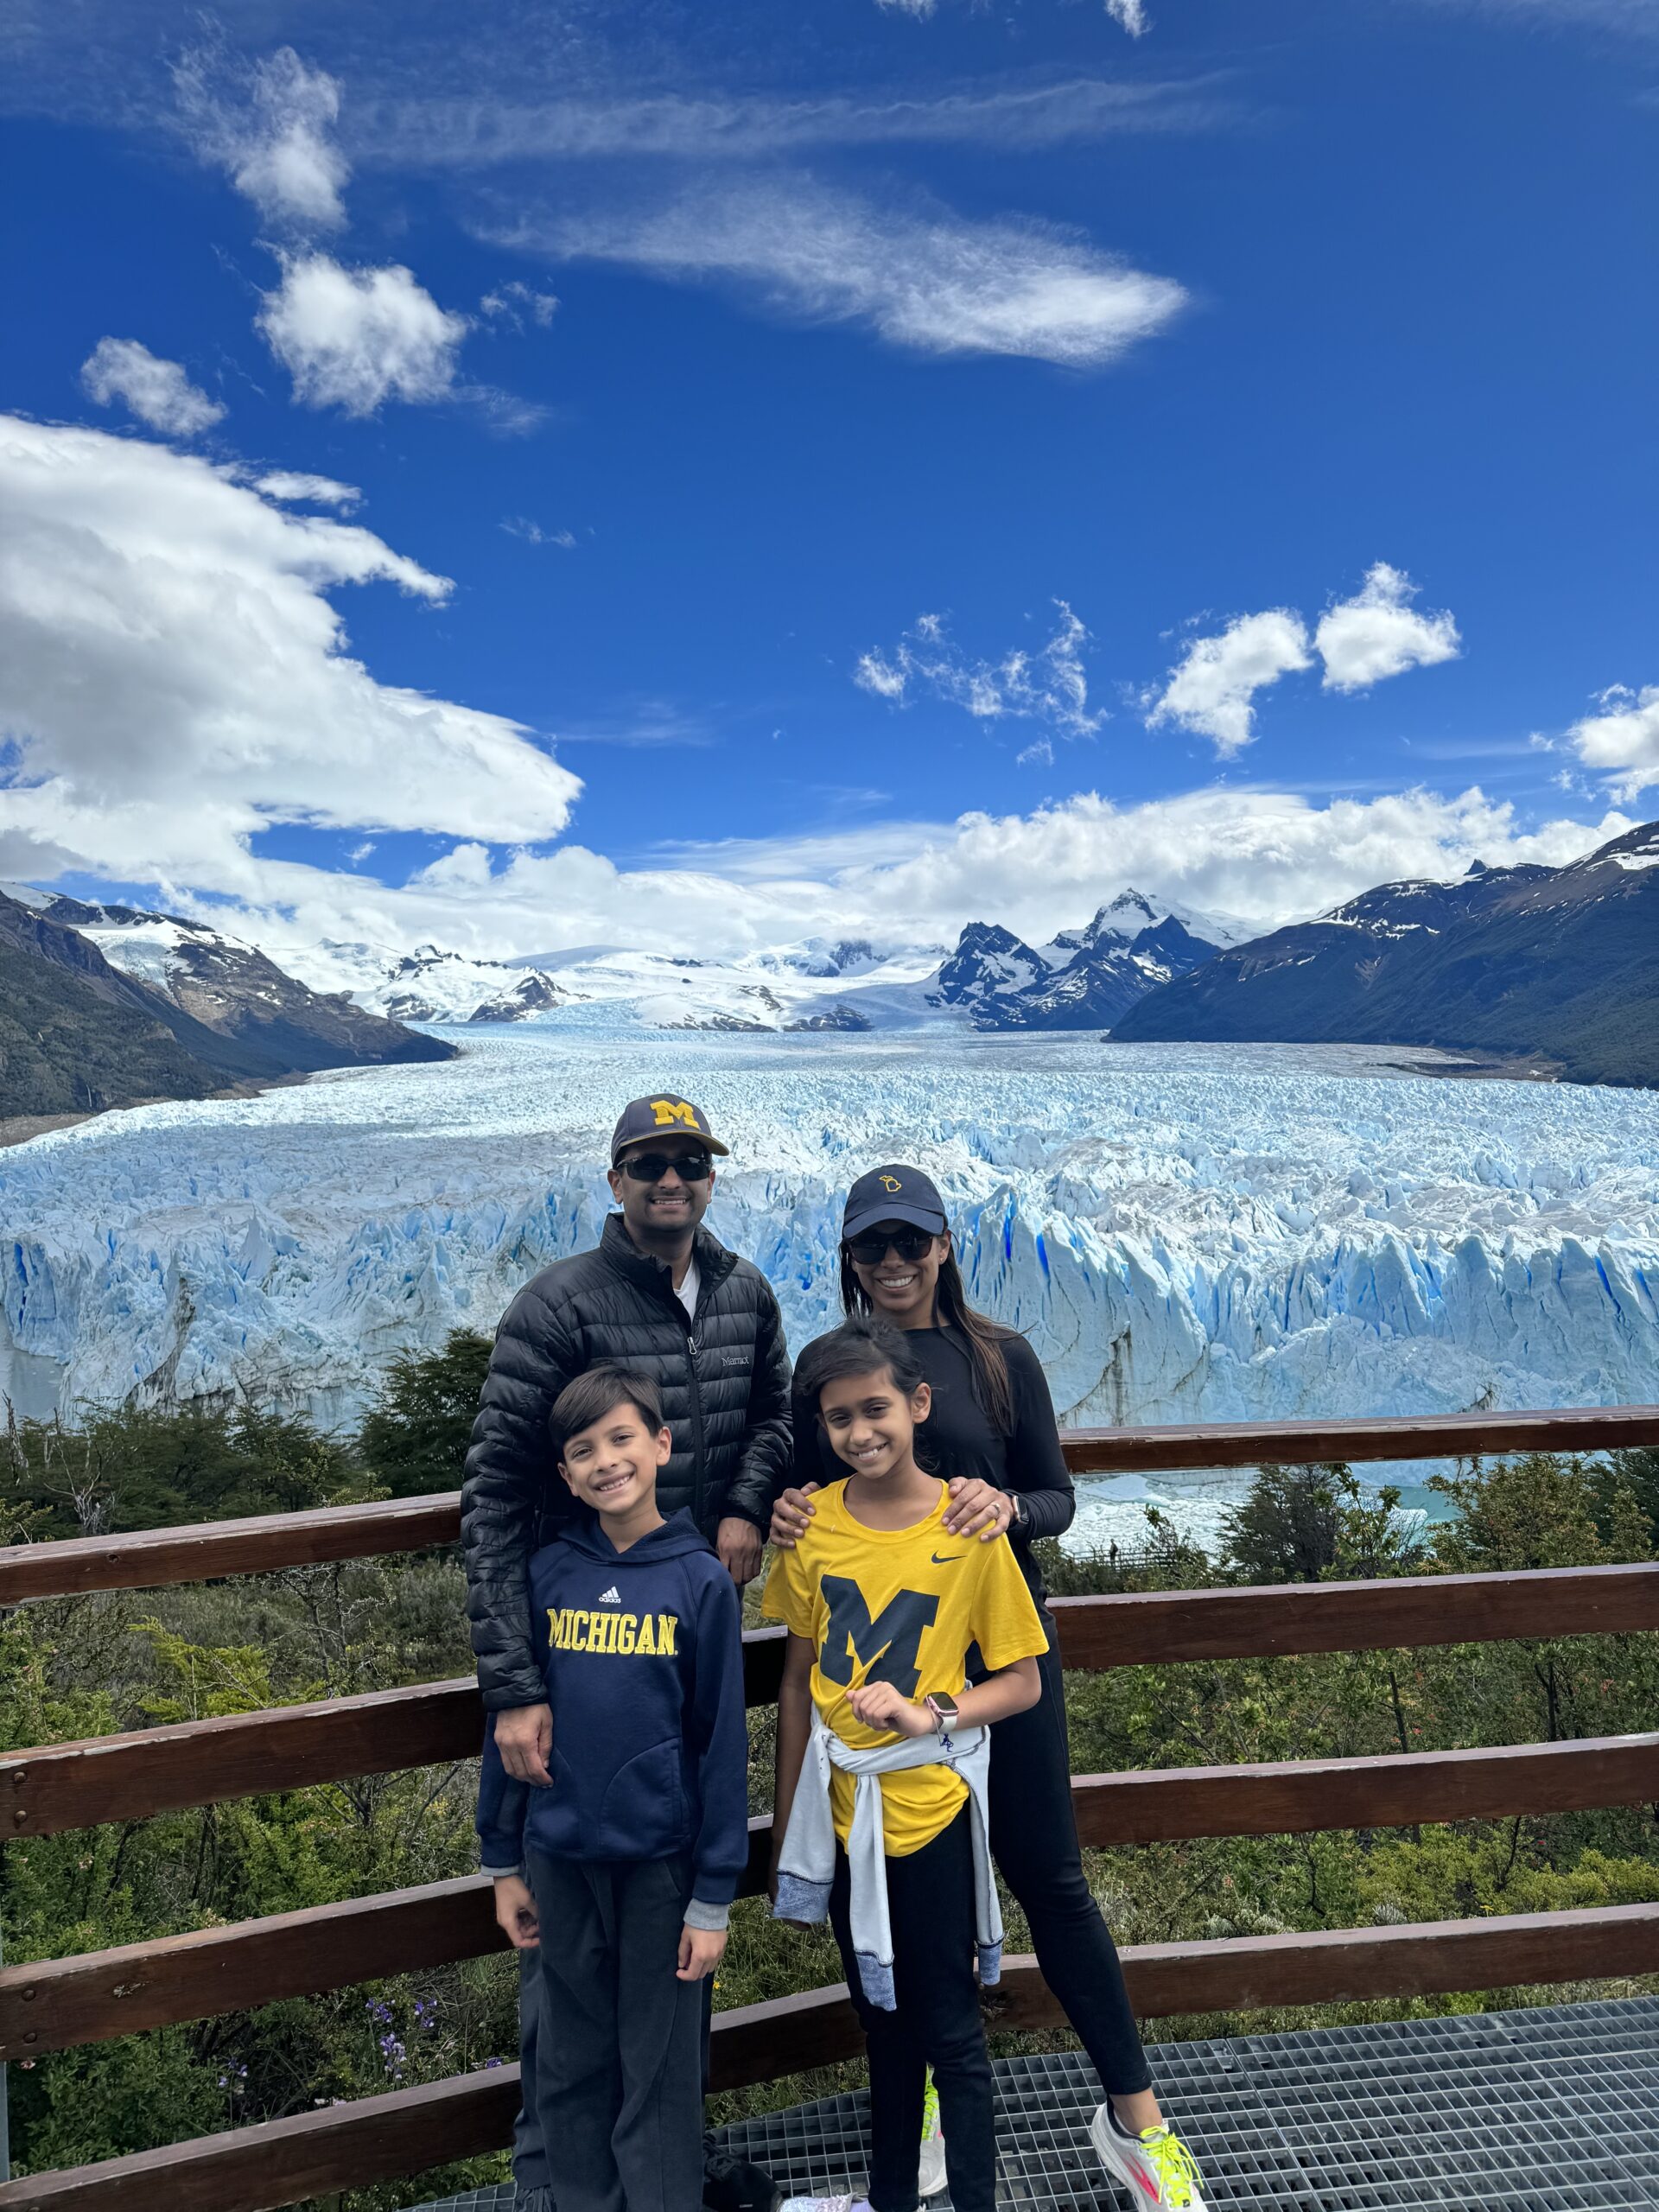 The family of Smita and Ankur Mehta, ’04, took a trip to South America’s Patagonia region and took an incredible photo with the Perito Moreno Glacier. Later, in their hotel room, they watched U-M defeat the University of Alabama in the Rose Bowl.